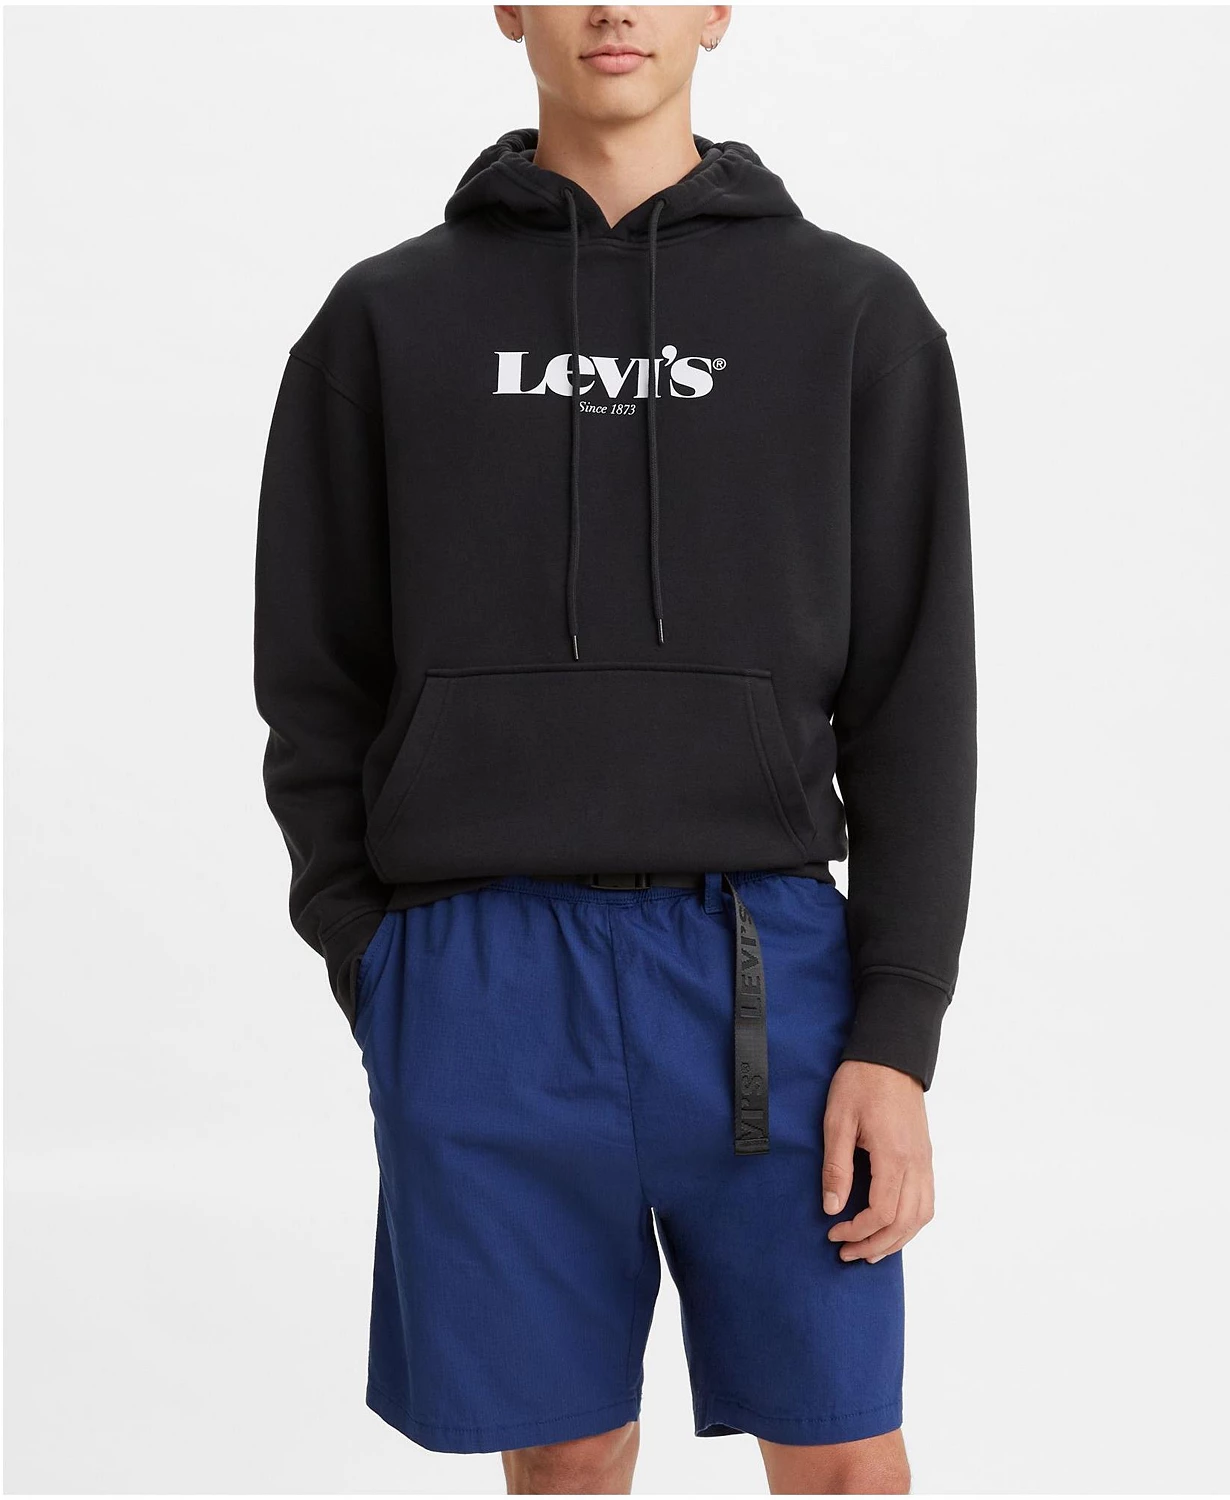 Levi's Men's Graphic Relaxed Fit Hoodie $36 Shipped!